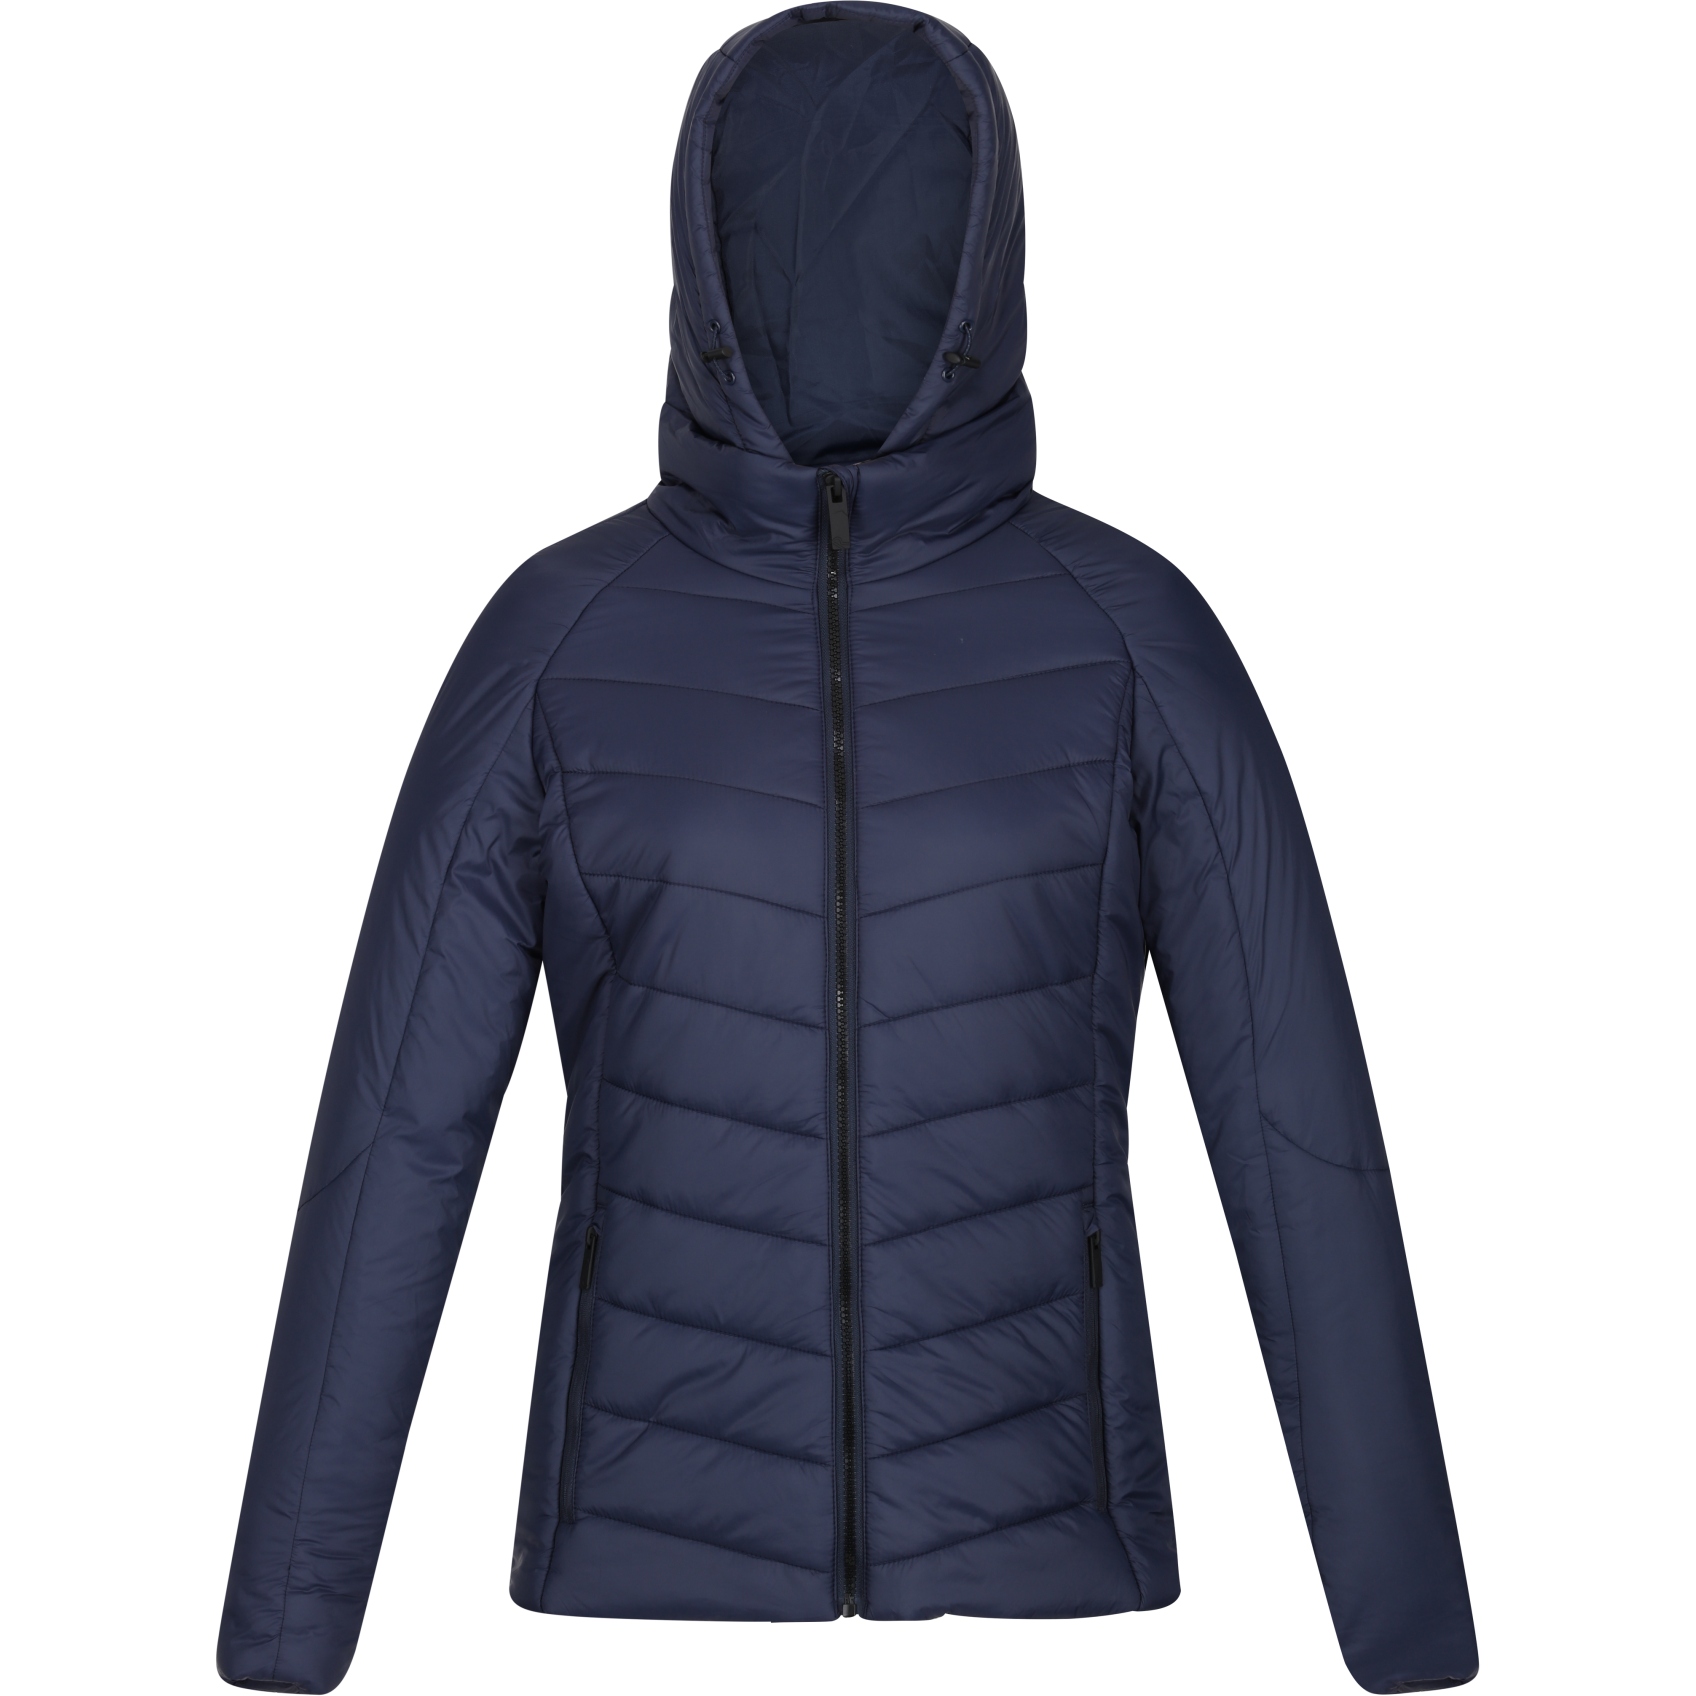 Chaqueta Calefactable Mujer Gris 